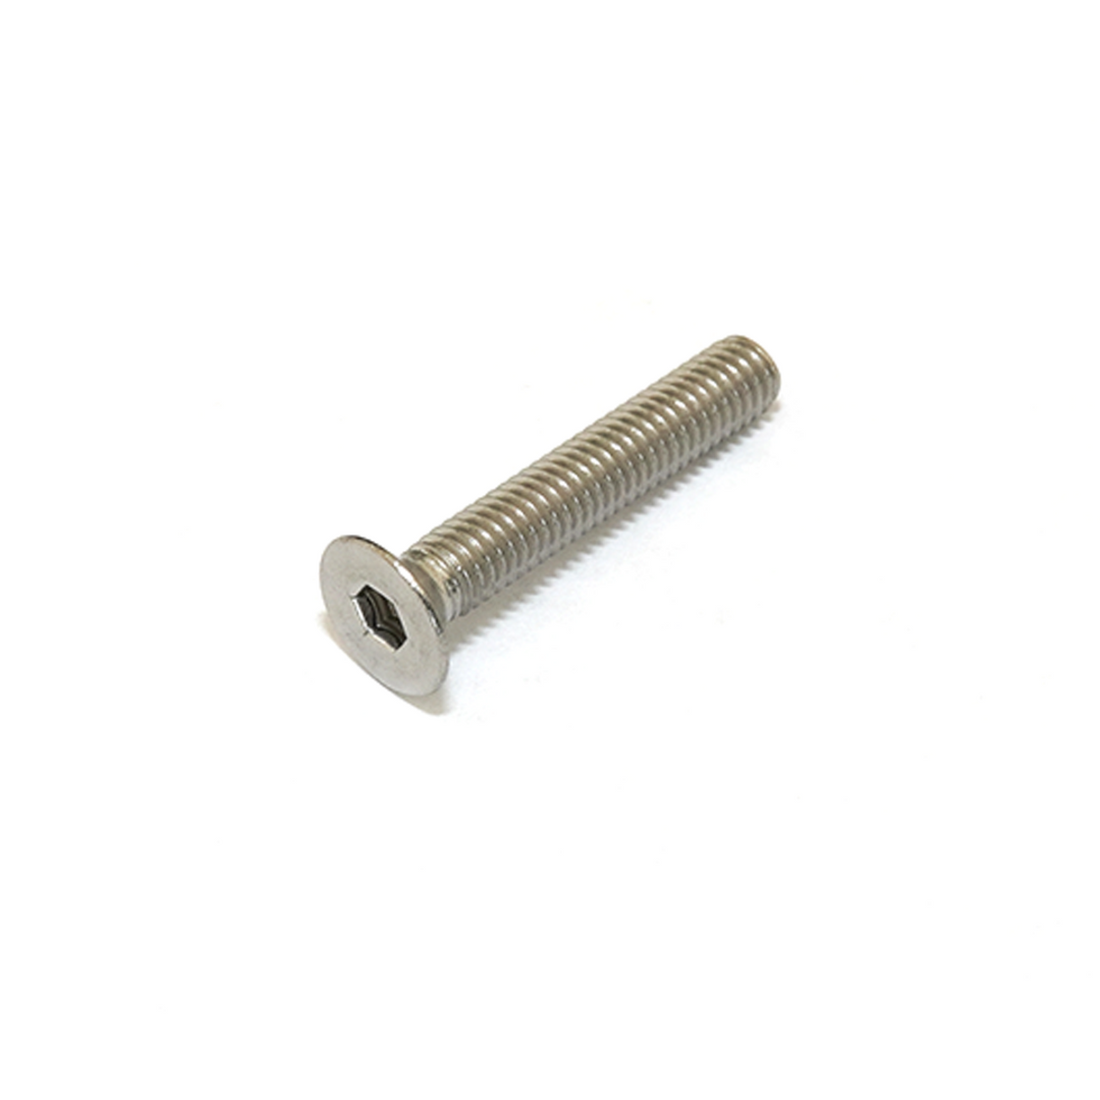 Box One Alloy Headset Compression Cap Bolt Stainless Steel - boxcomponents